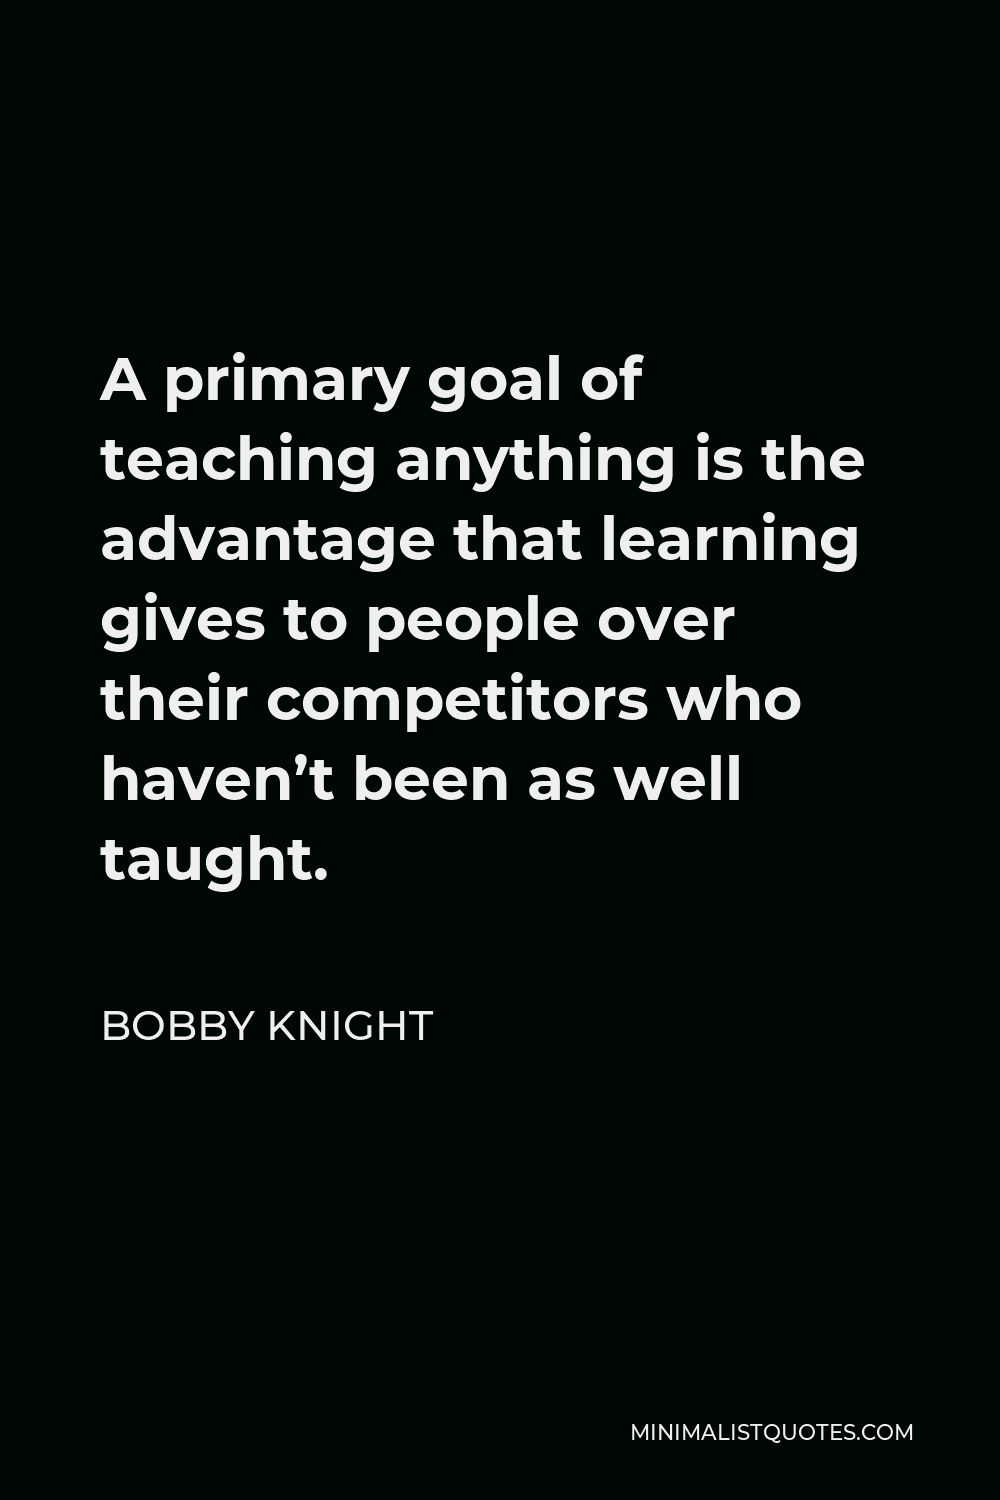 Bobby Knight Quote - A primary goal of teaching anything is the advantage that learning gives to people over their competitors who haven’t been as well taught.